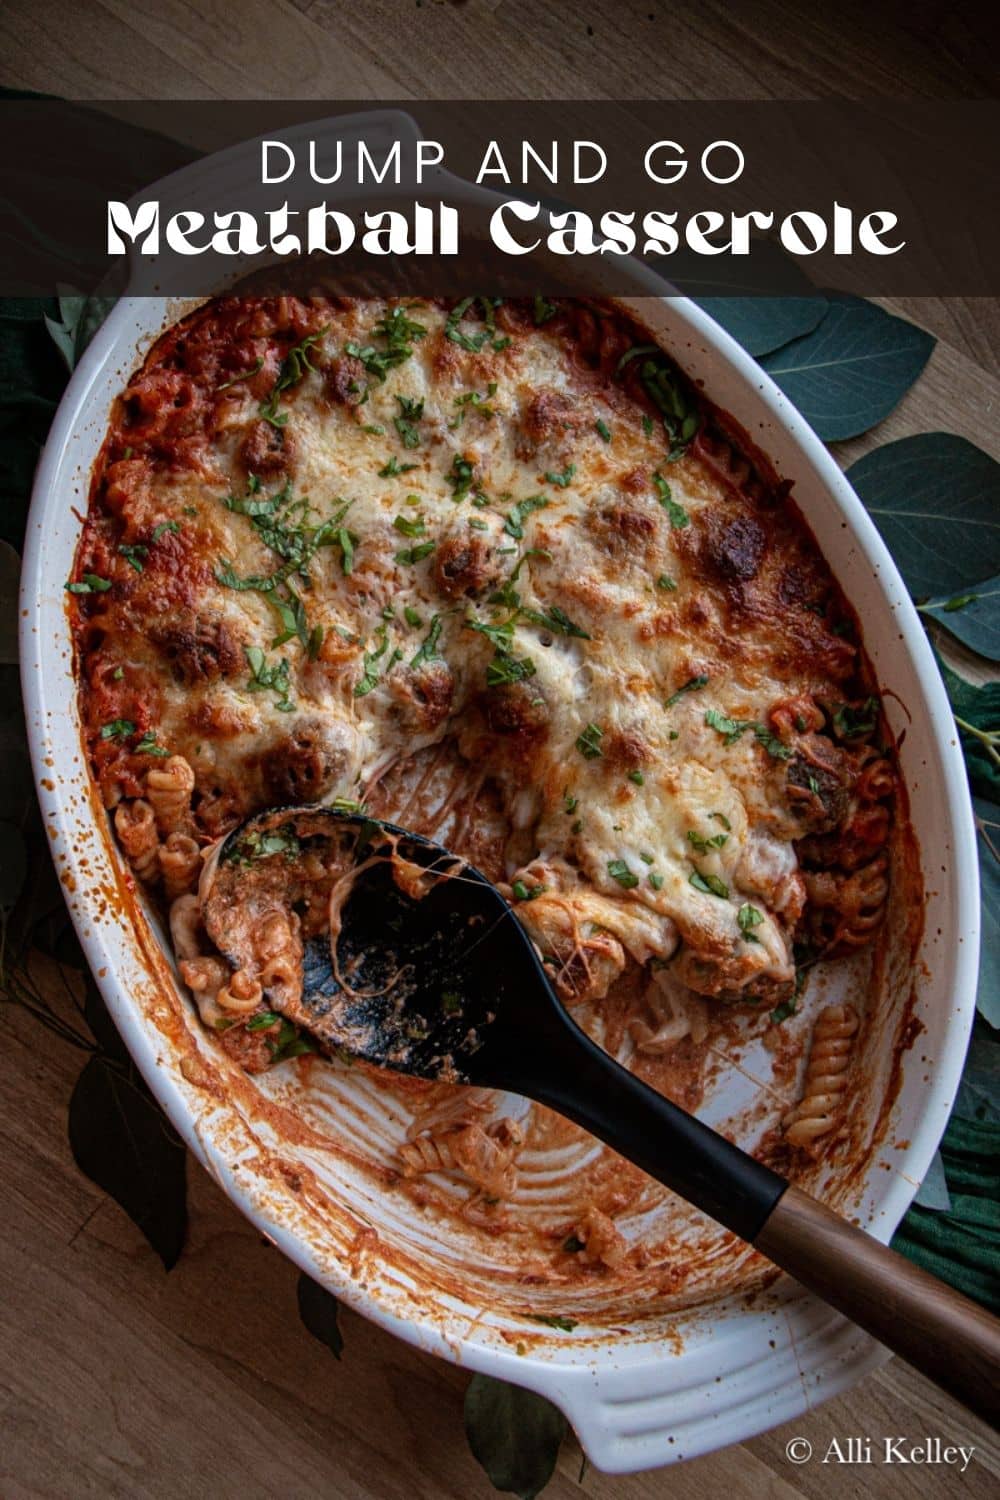 Are you looking for a comforting and satisfying mid-week meal? Then you just have to try my meatball casserole! This hearty and flavorful dish is a classic for good reason - you can't go wrong with tender meatballs, rich tomato sauce, and melted cheese. My meatball casserole is so simple to make, yet always a hit when served to family or friends!